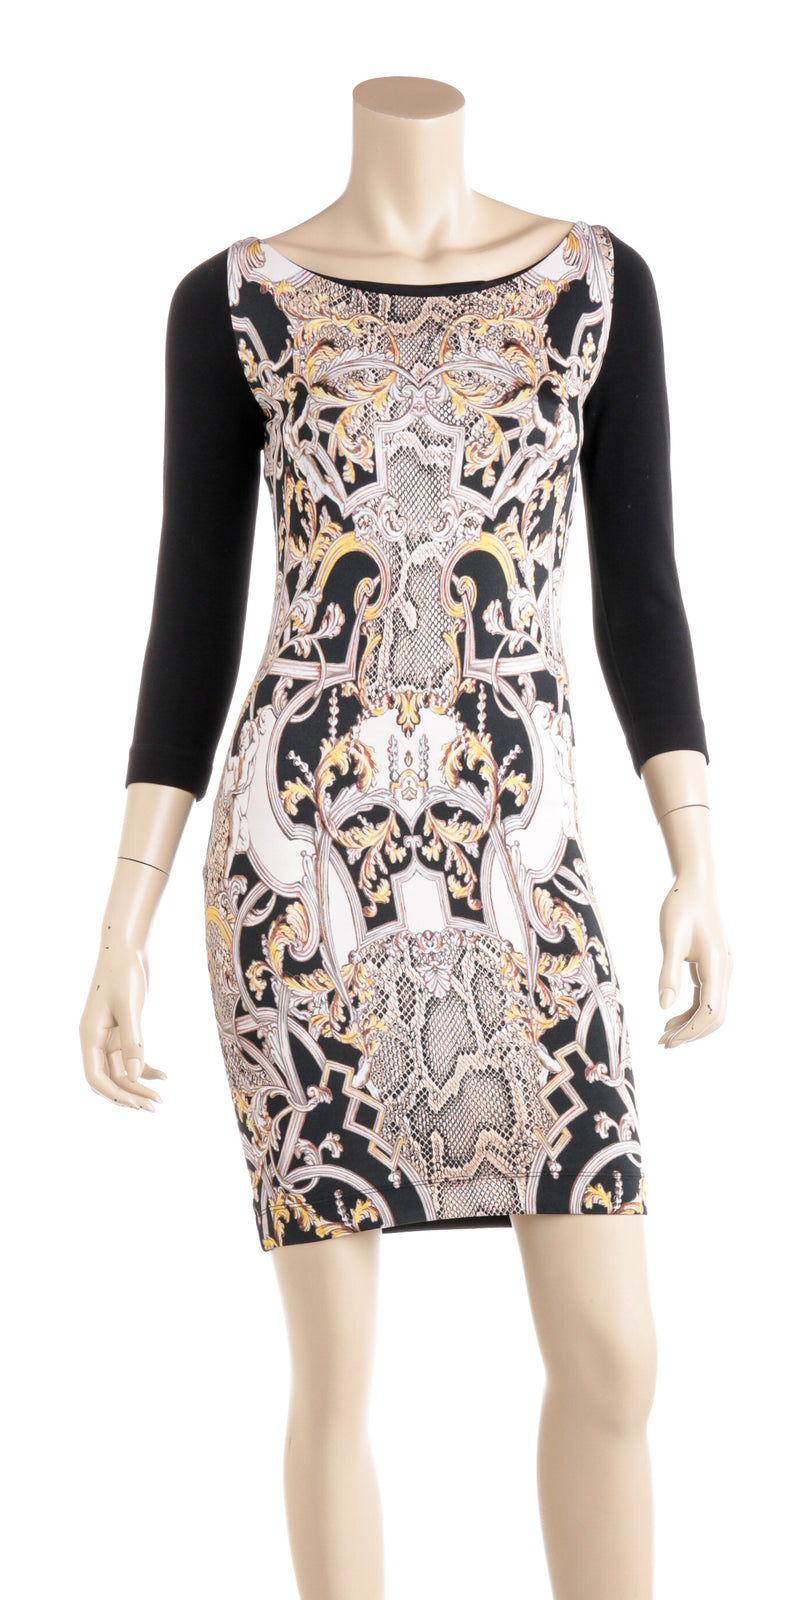 Just Cavalli Black Gold & Brown Print Bodycon Dress Long Sleeves Size Small